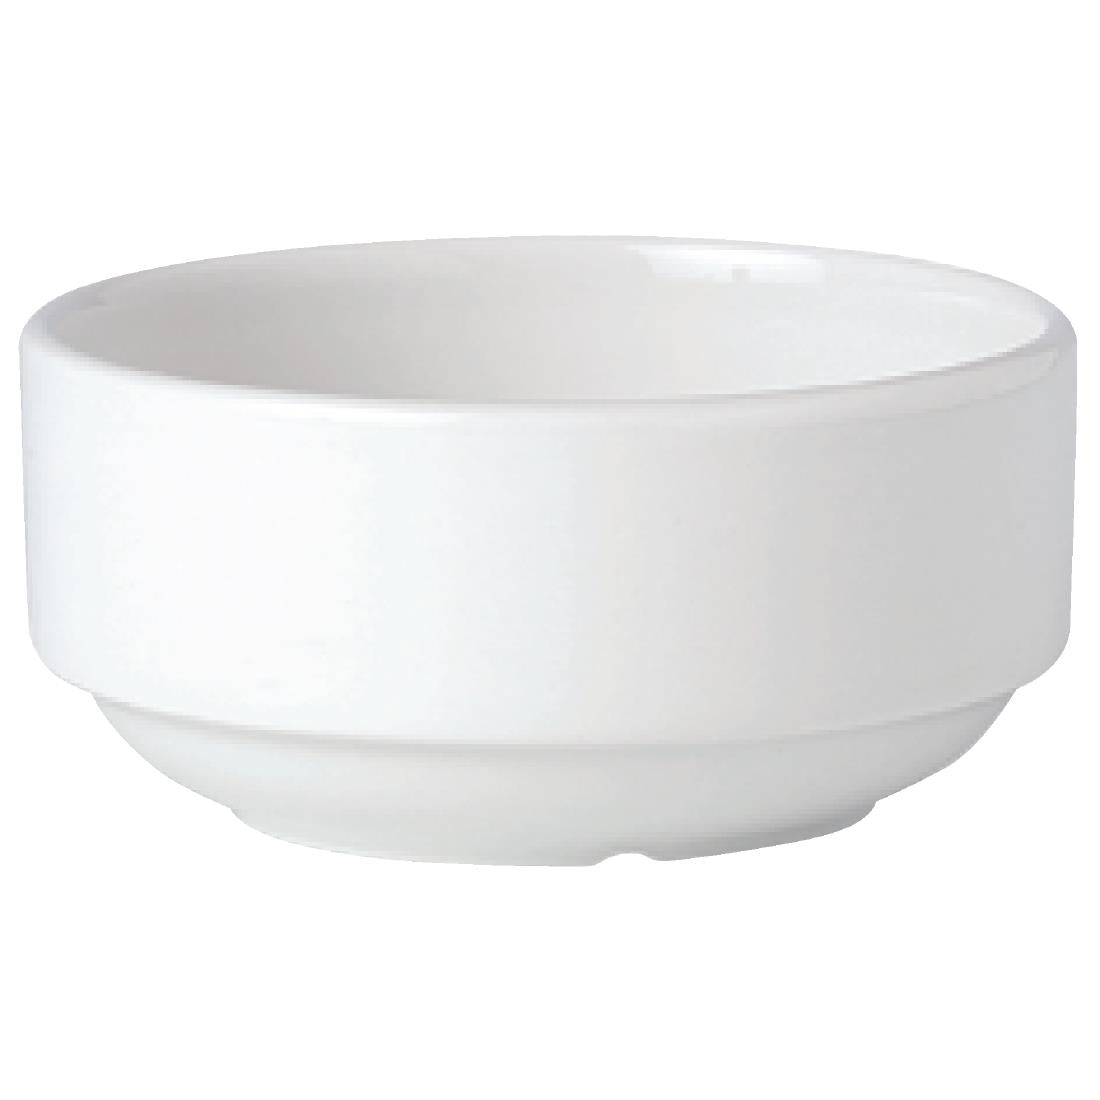 Steelite Simplicity White Stacking Soup Cups 285ml (Pack of 36)